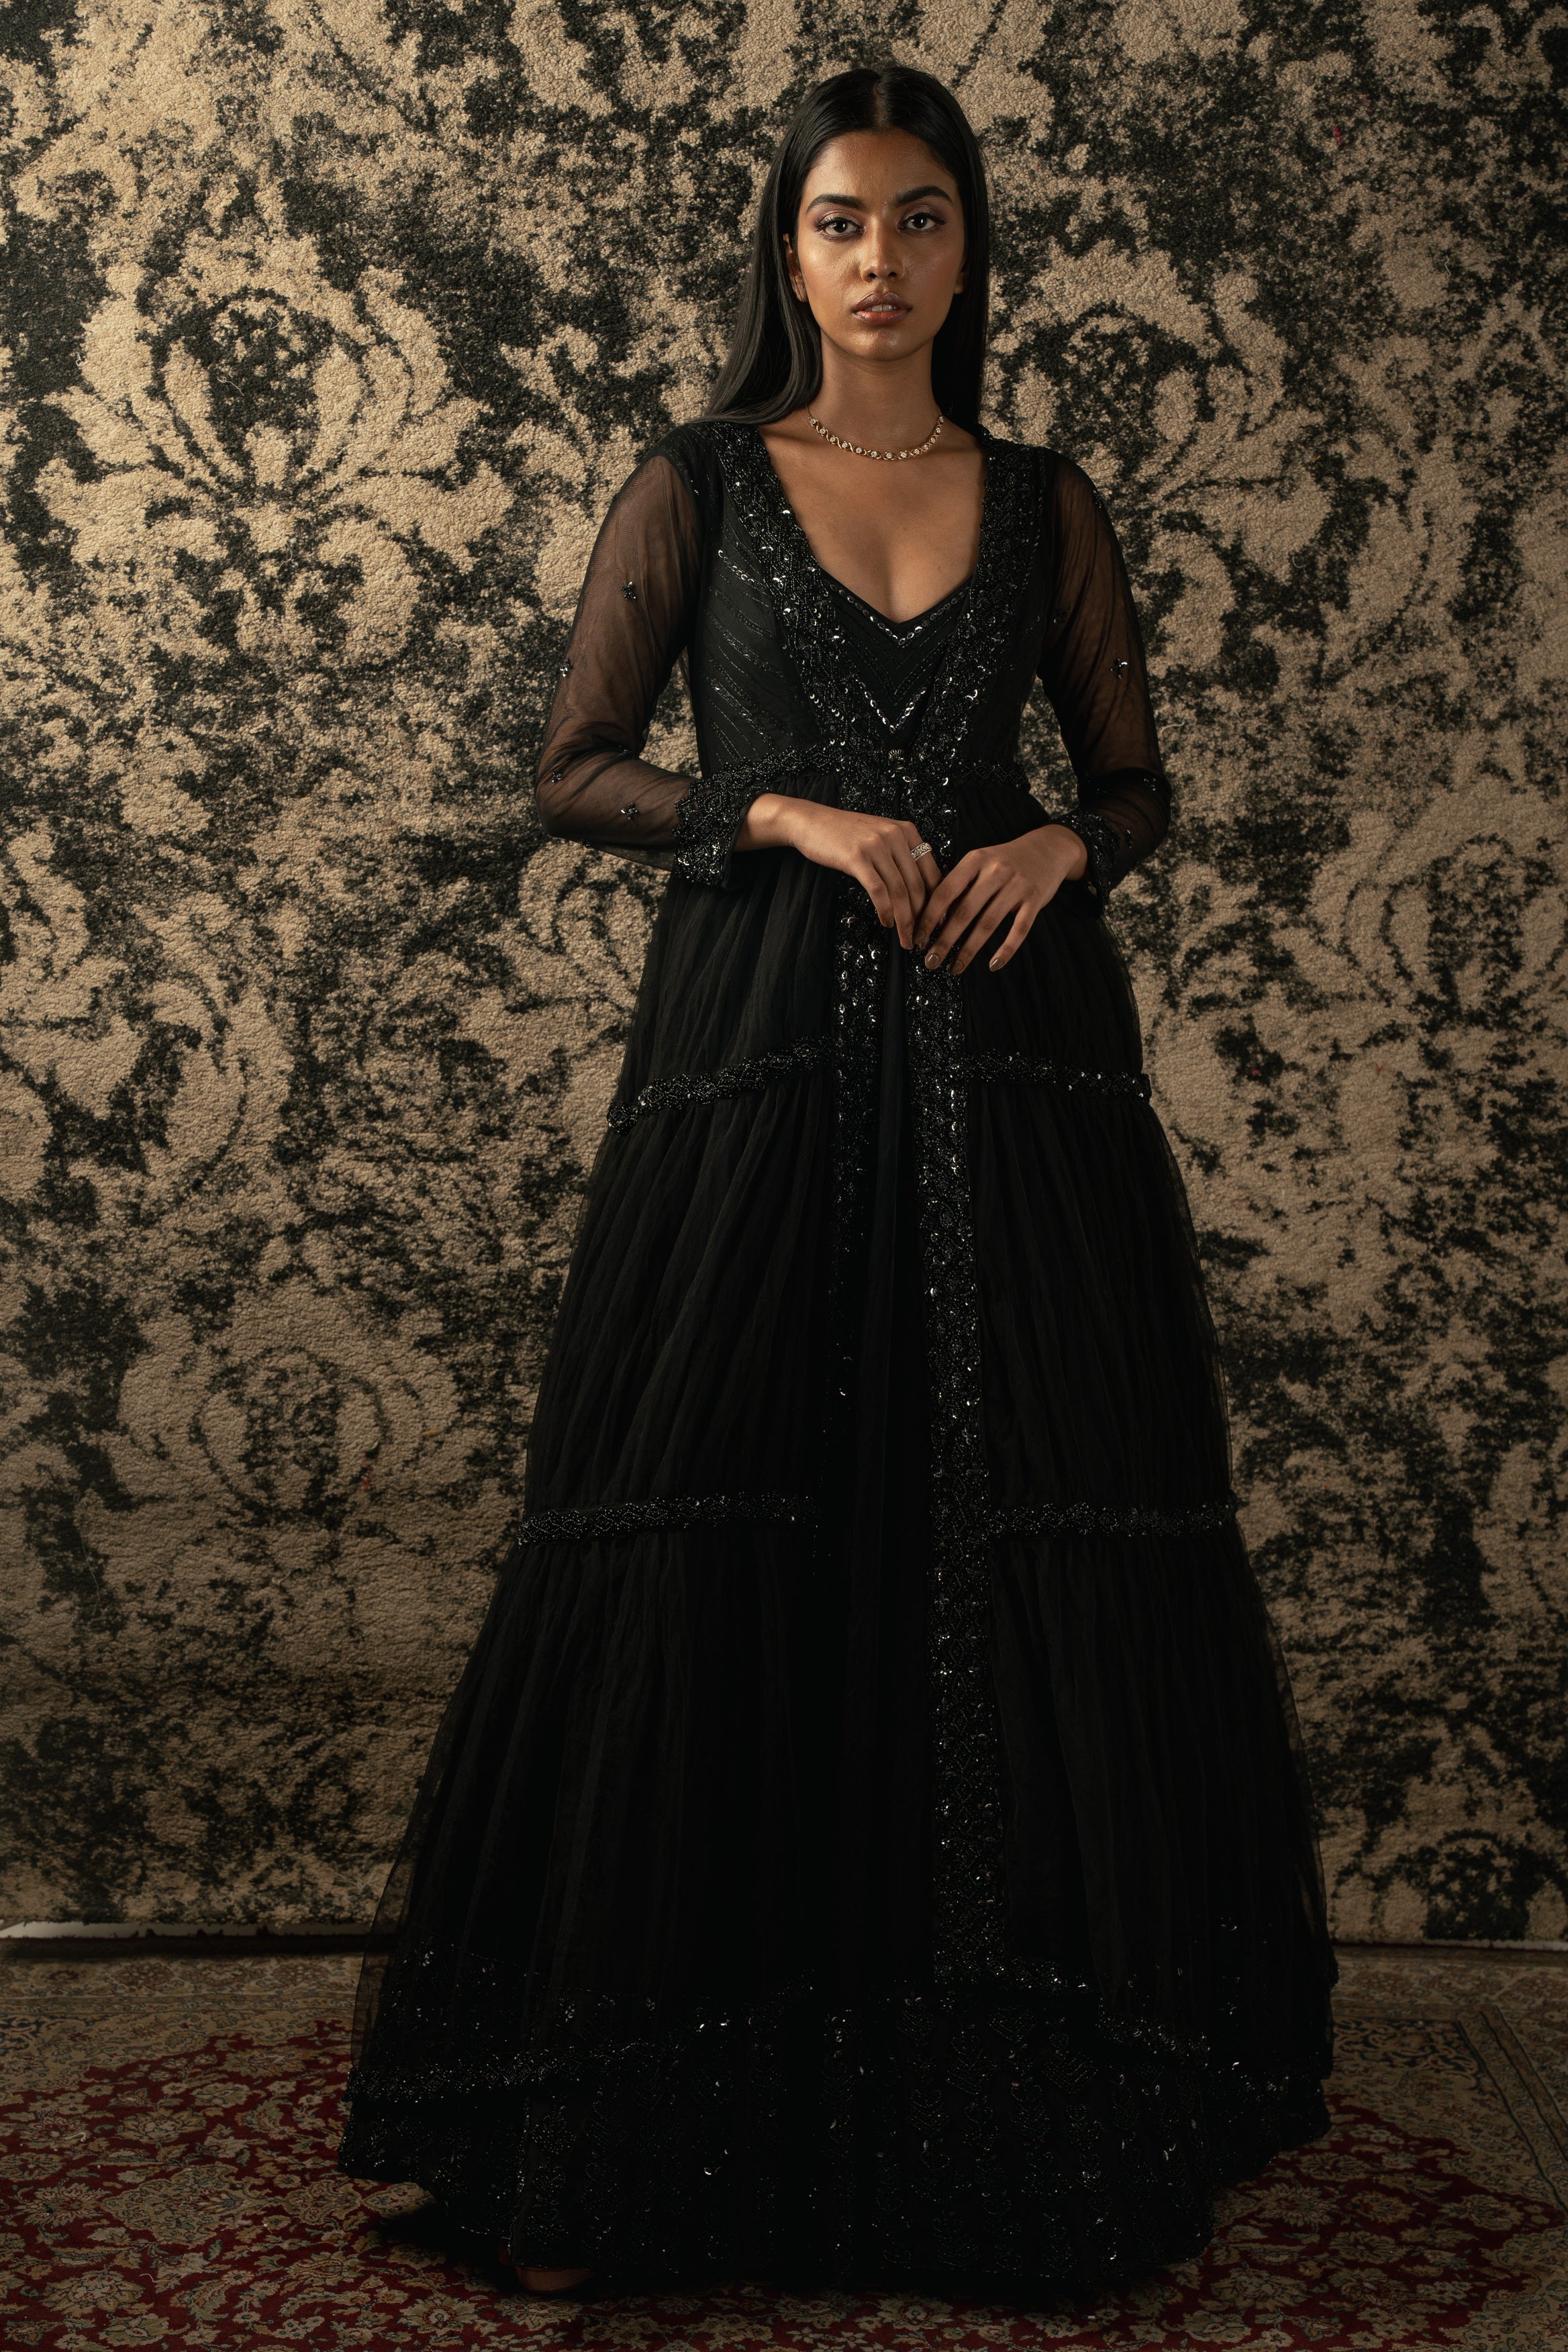 Elegance personified: Black organza Anarkali paired with a delicate net shrug. Embrace timeless beauty.